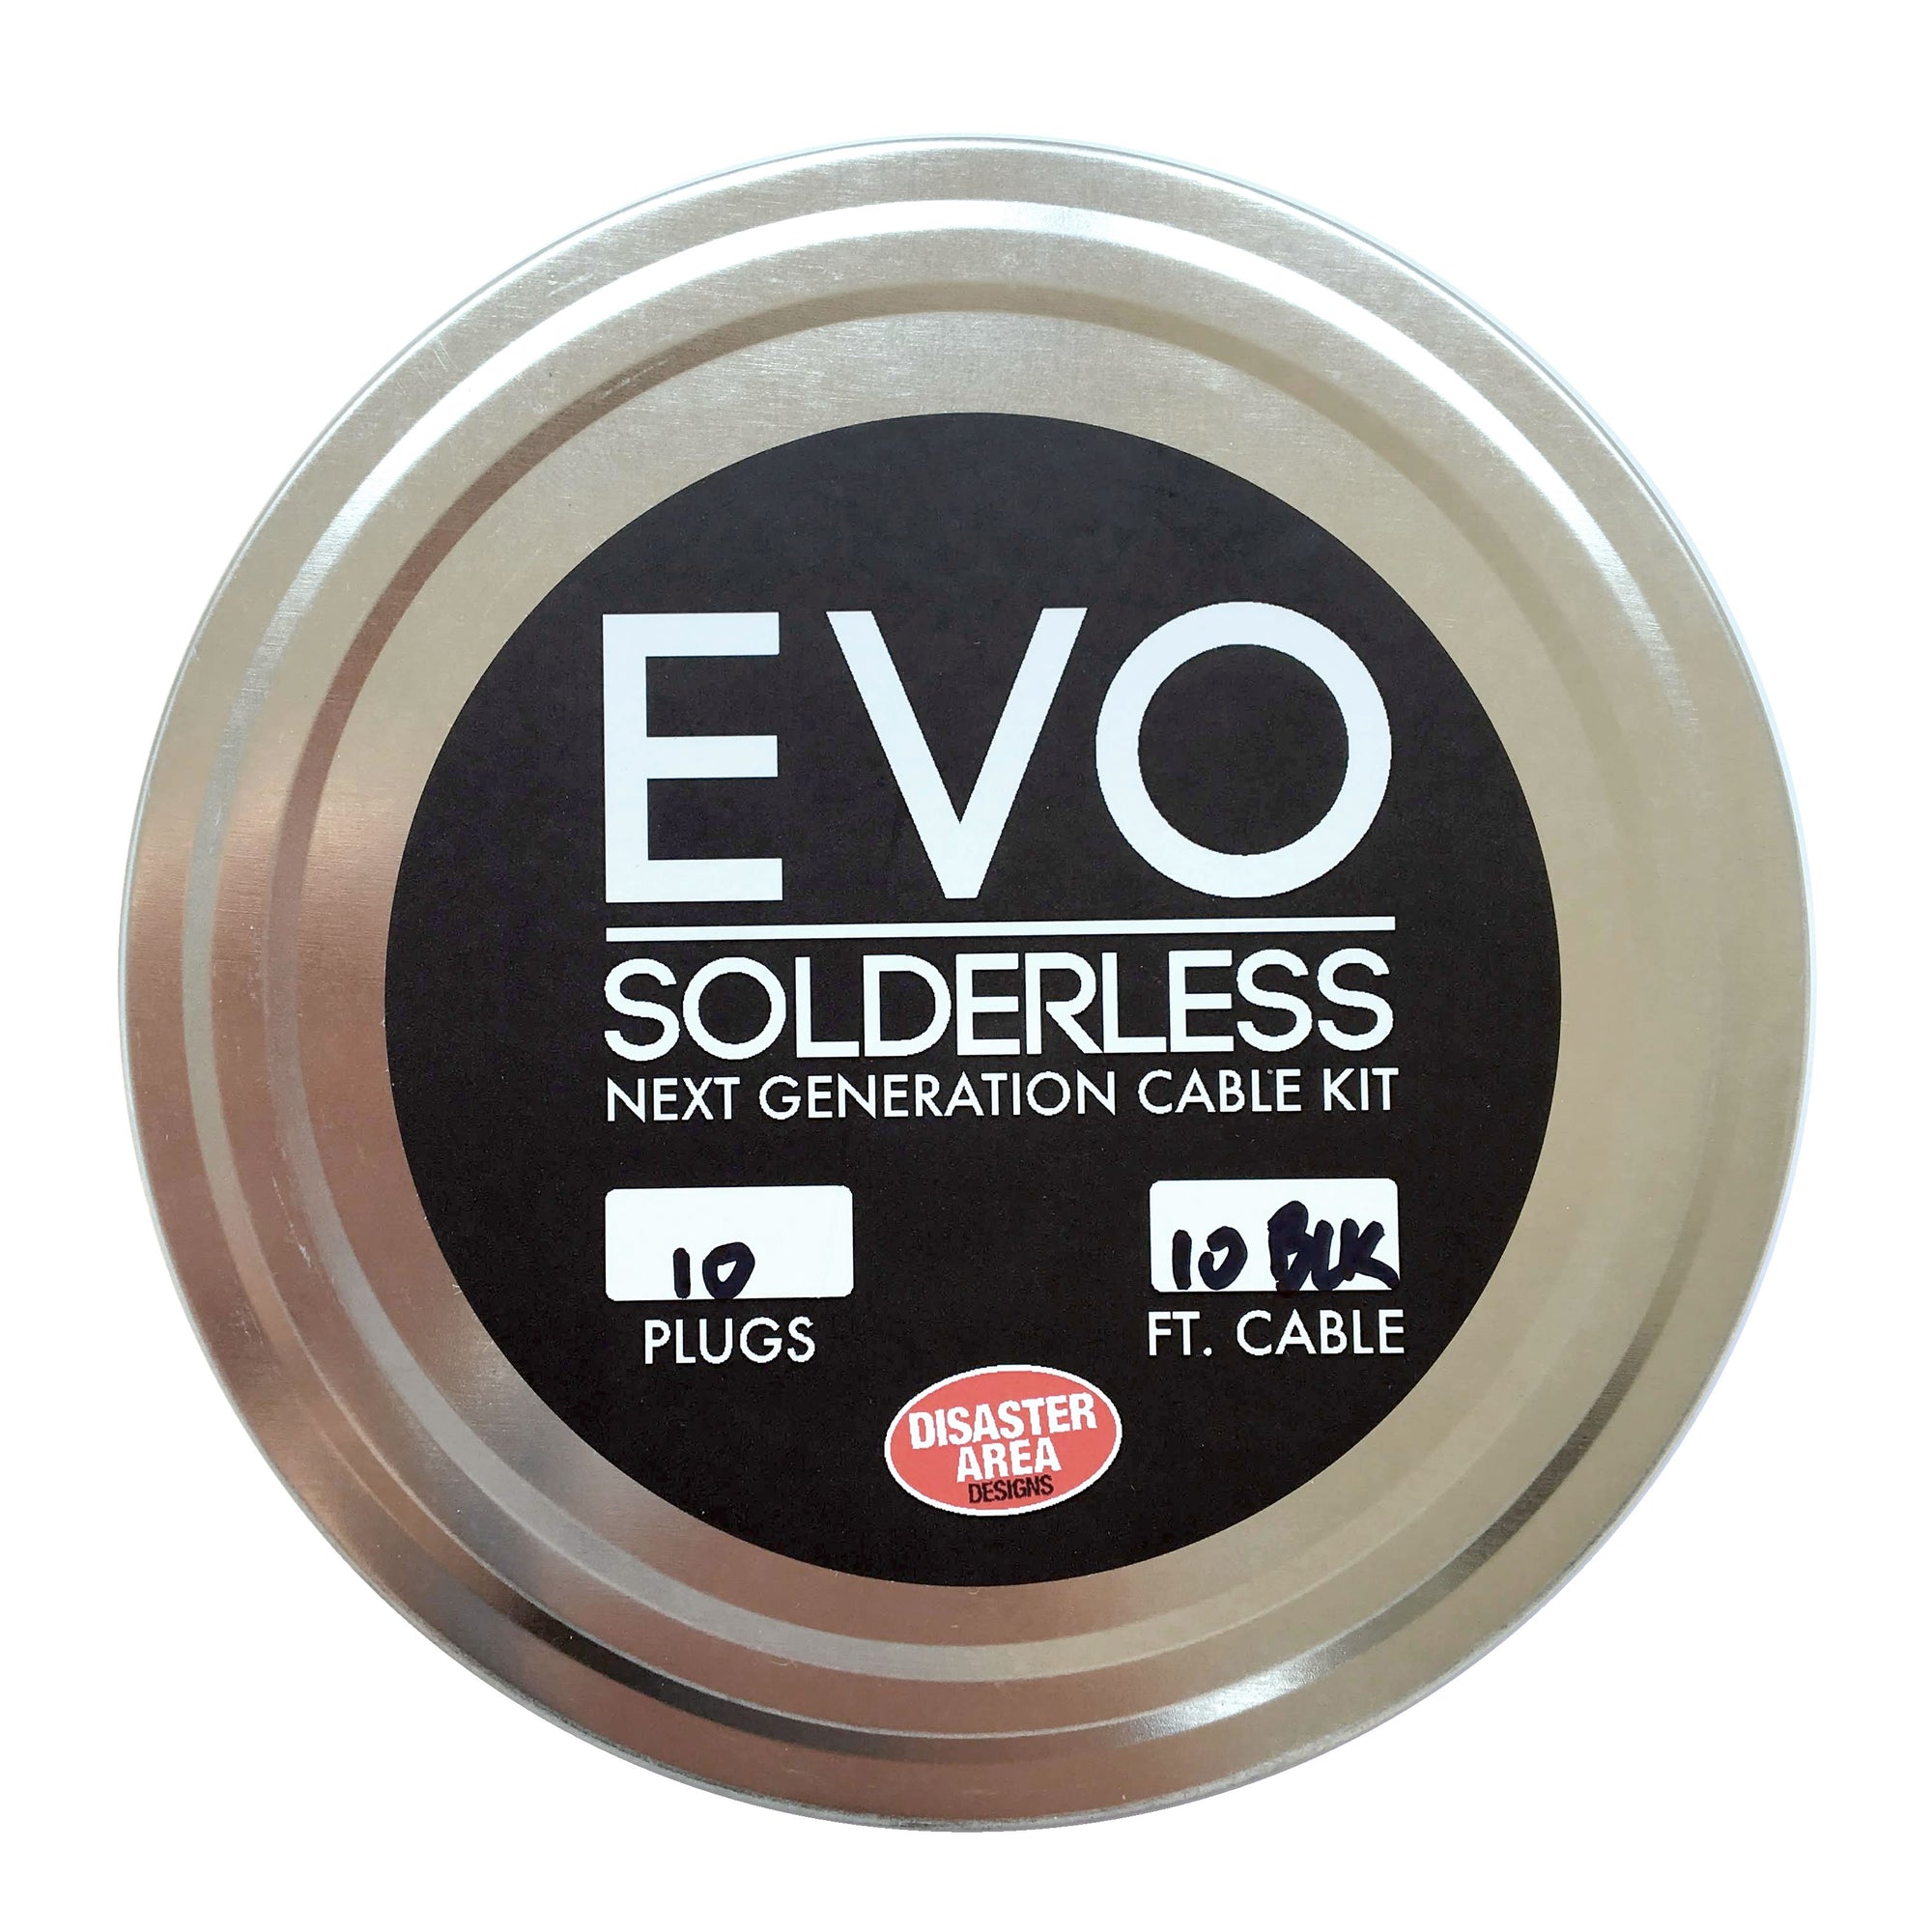 Disaster Area Designs EVO Solderless Cable Kit